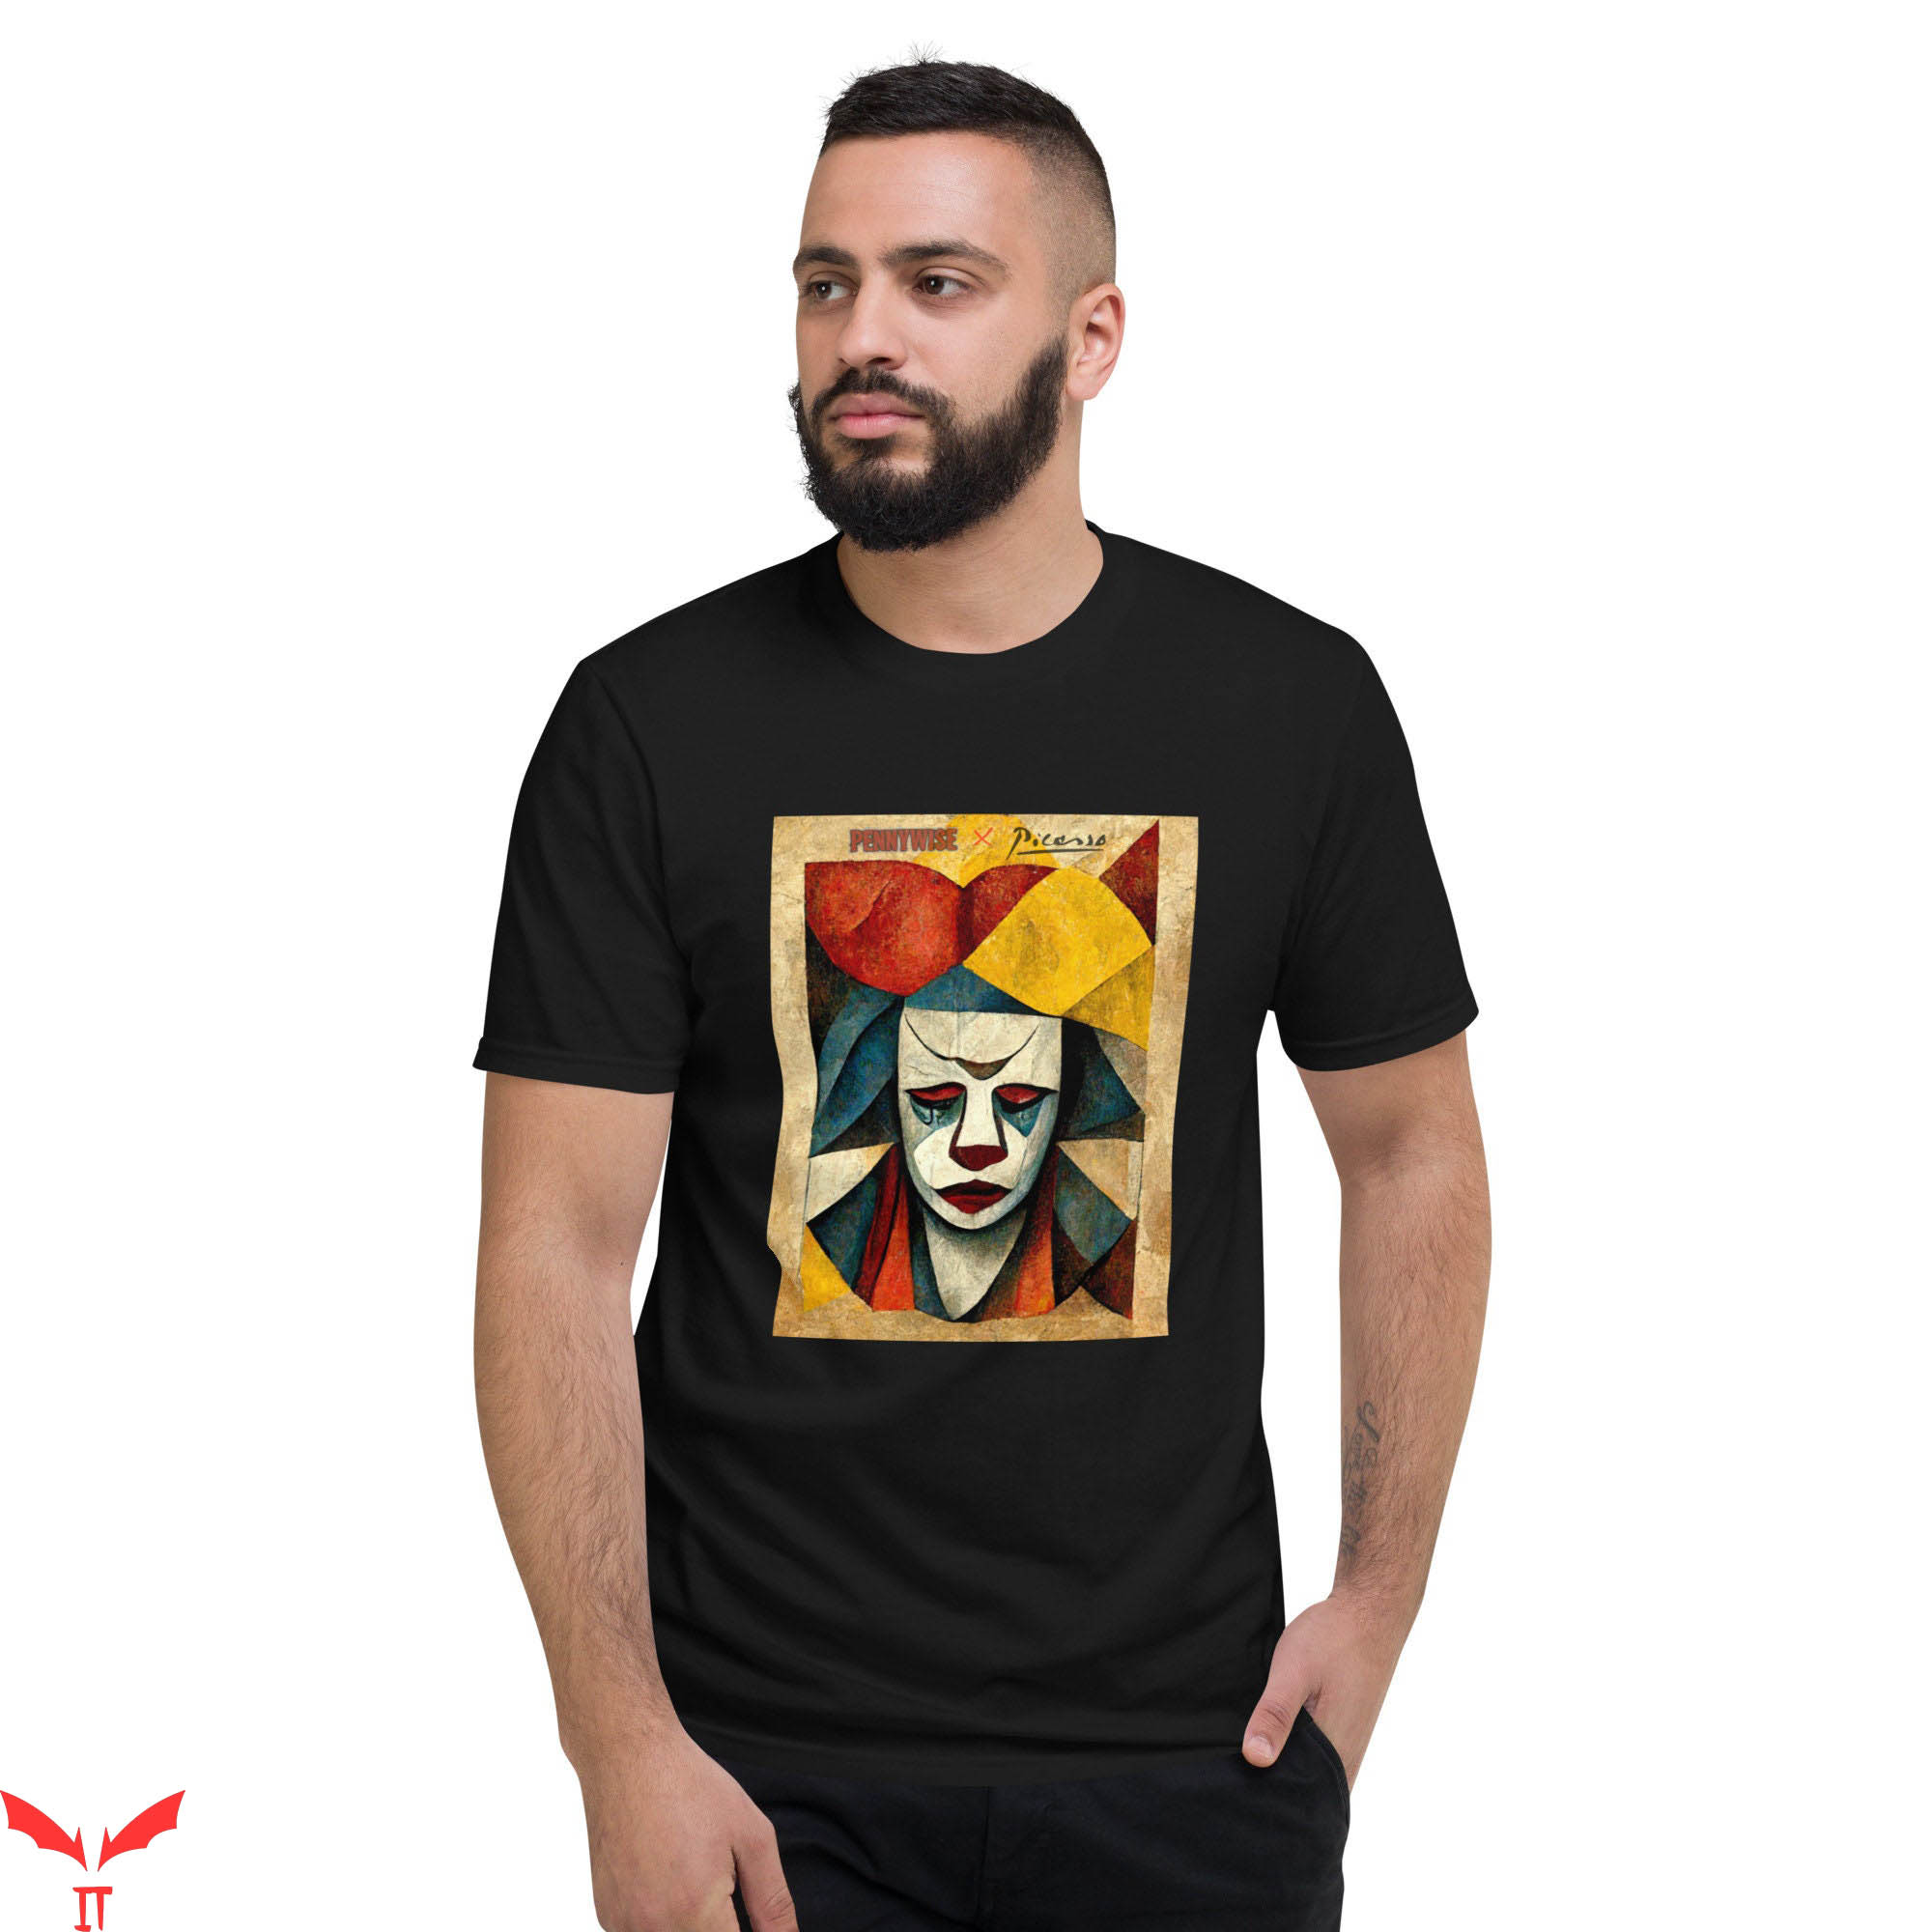 Pennywise Clown T Shirt Pennywise The Clown x Pablo Picasso